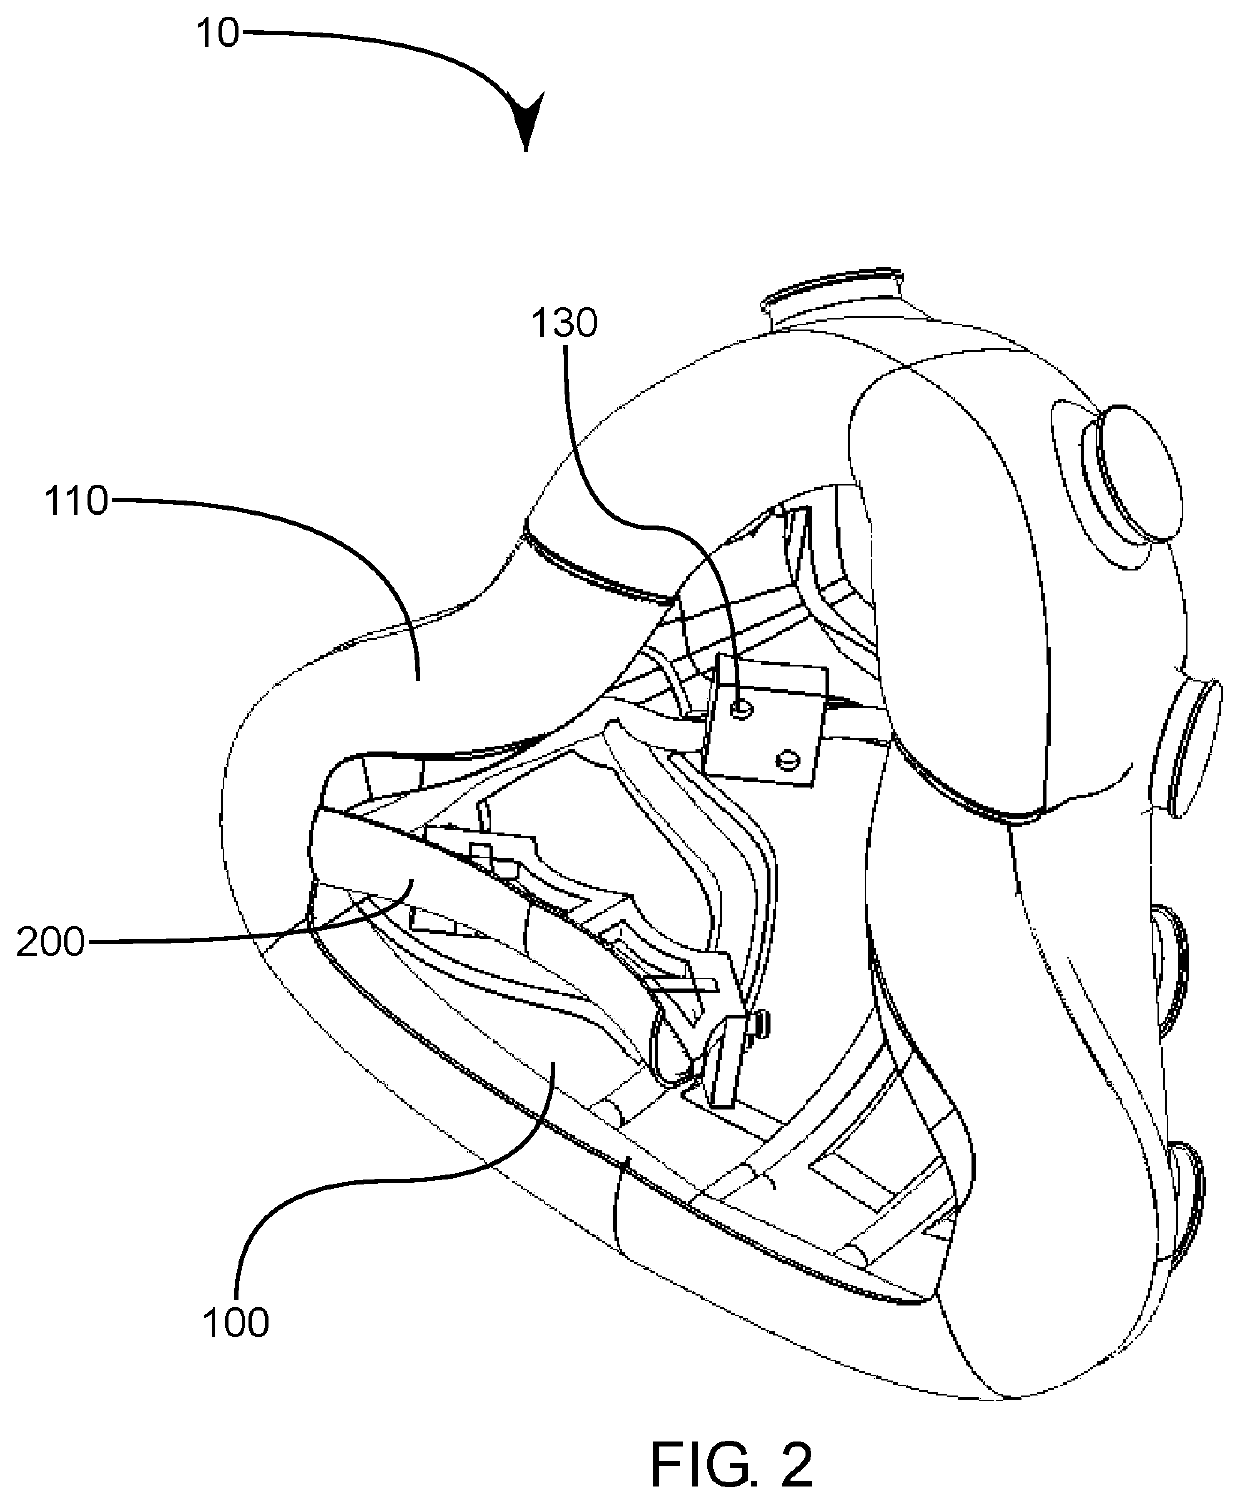 Facial mask with internal intermediate maxilla support for use with ventilation and positive air pressure systems